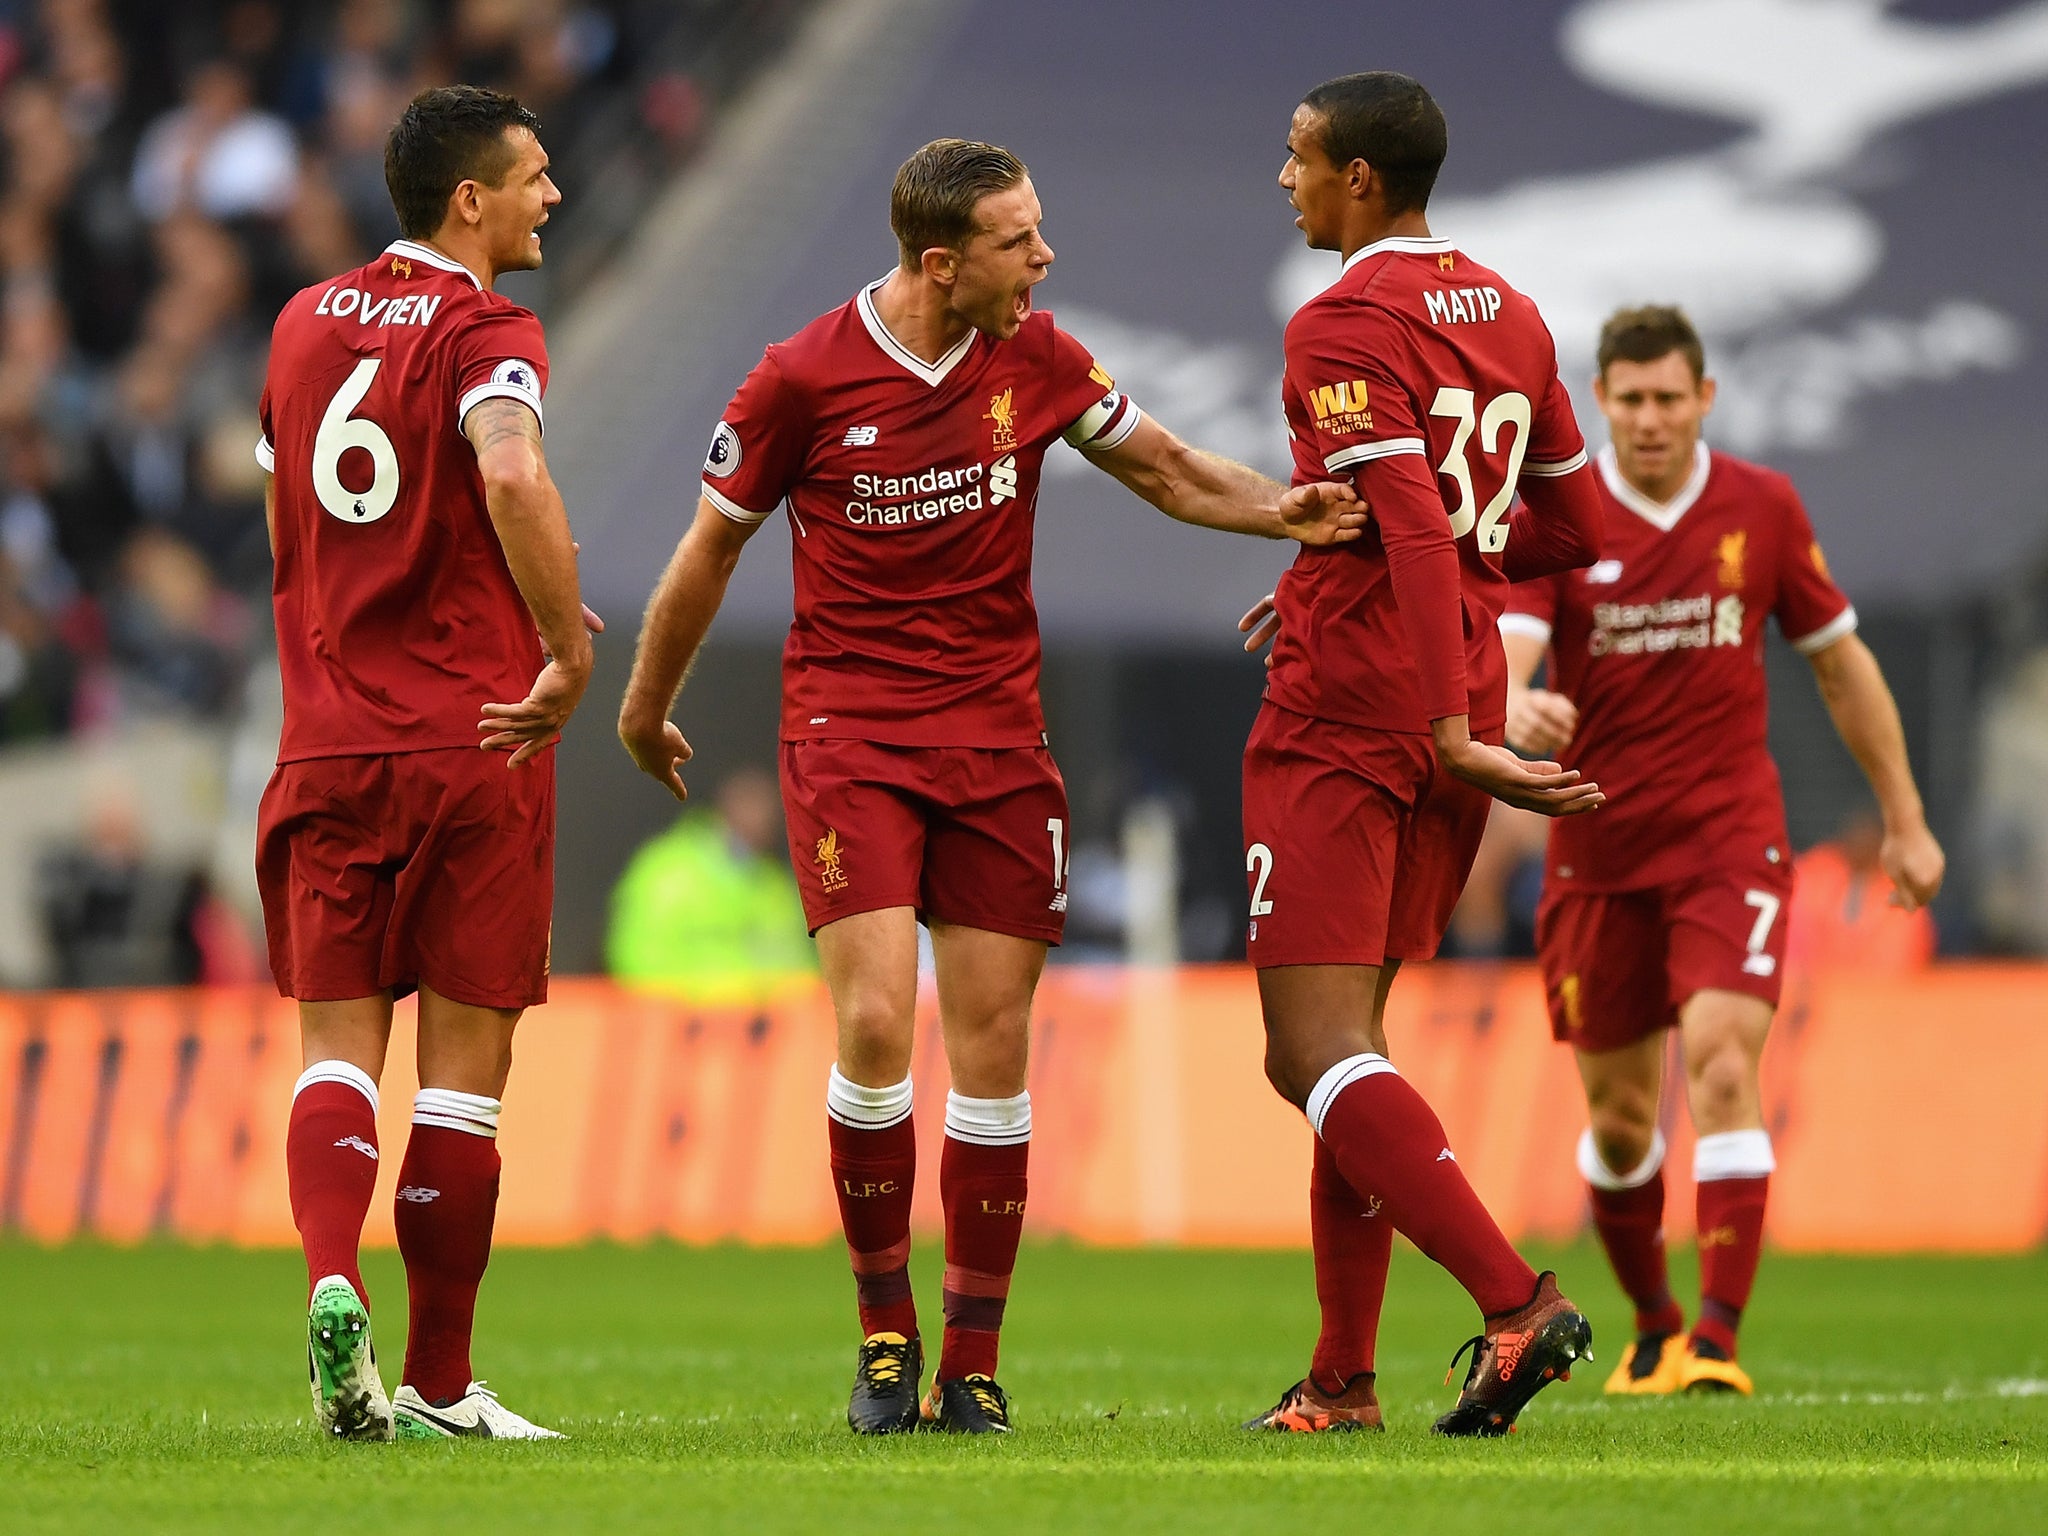 Liverpool's defence has faced significant criticism this season